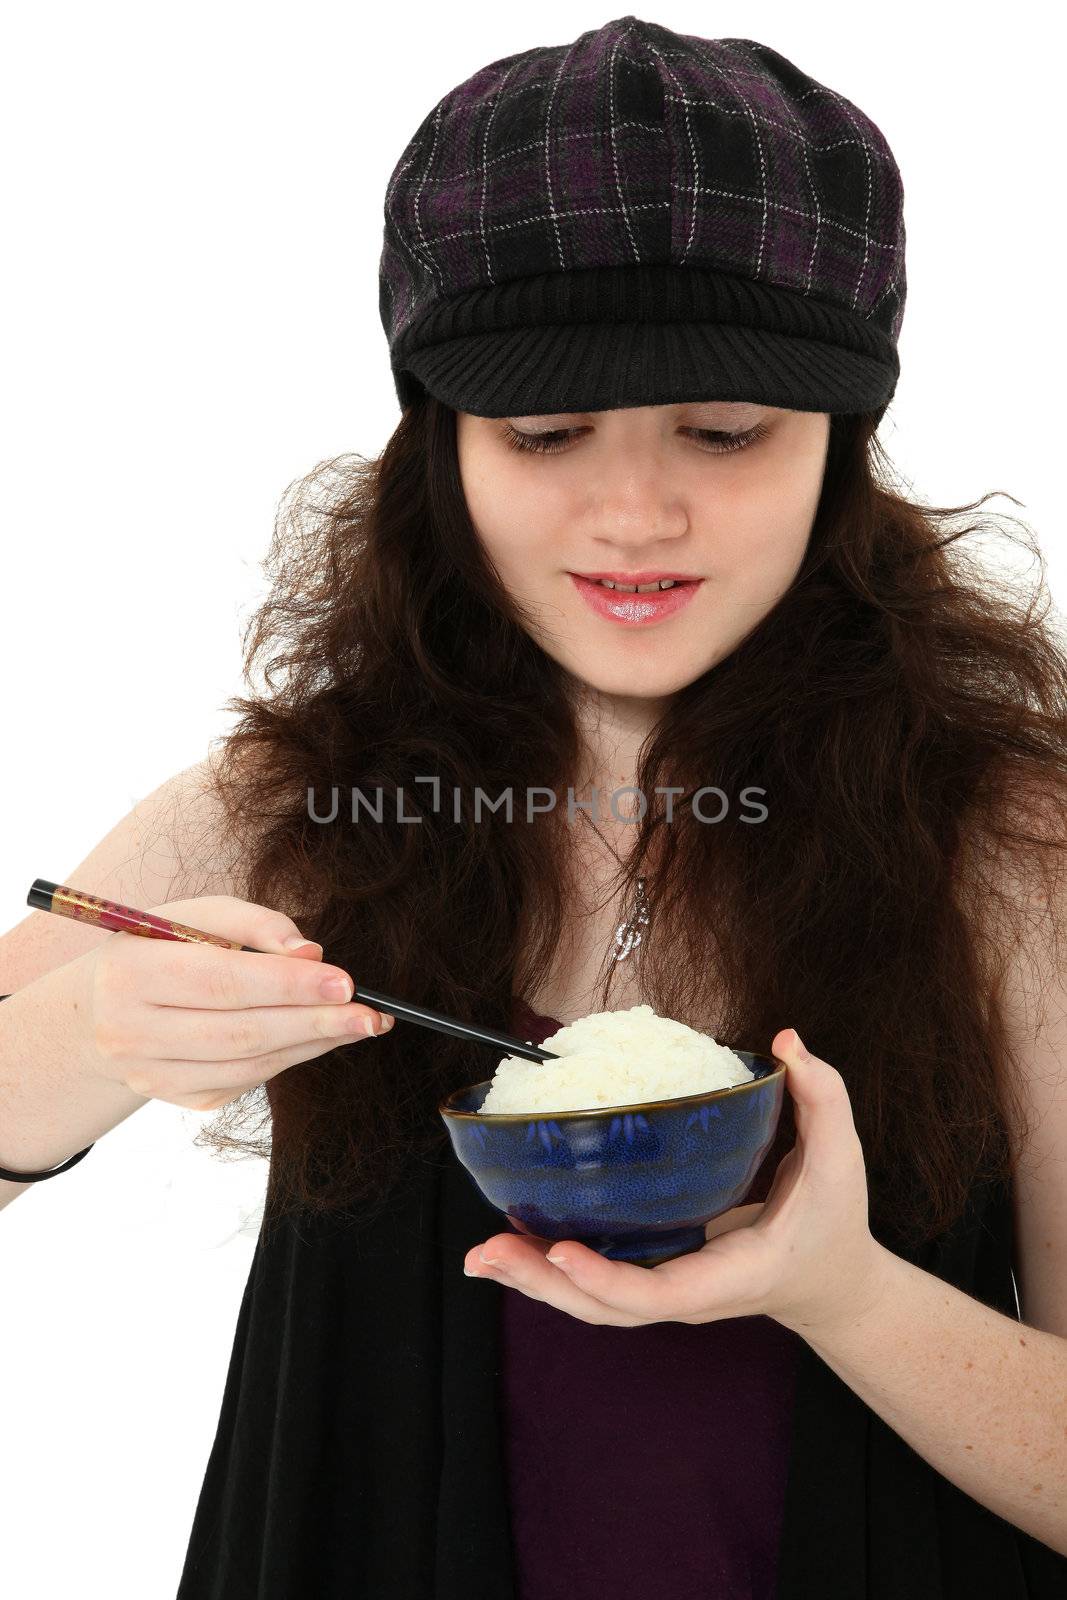 Attractive 18 year old young woman in hat eating bowl of rice with chopsticks over white.